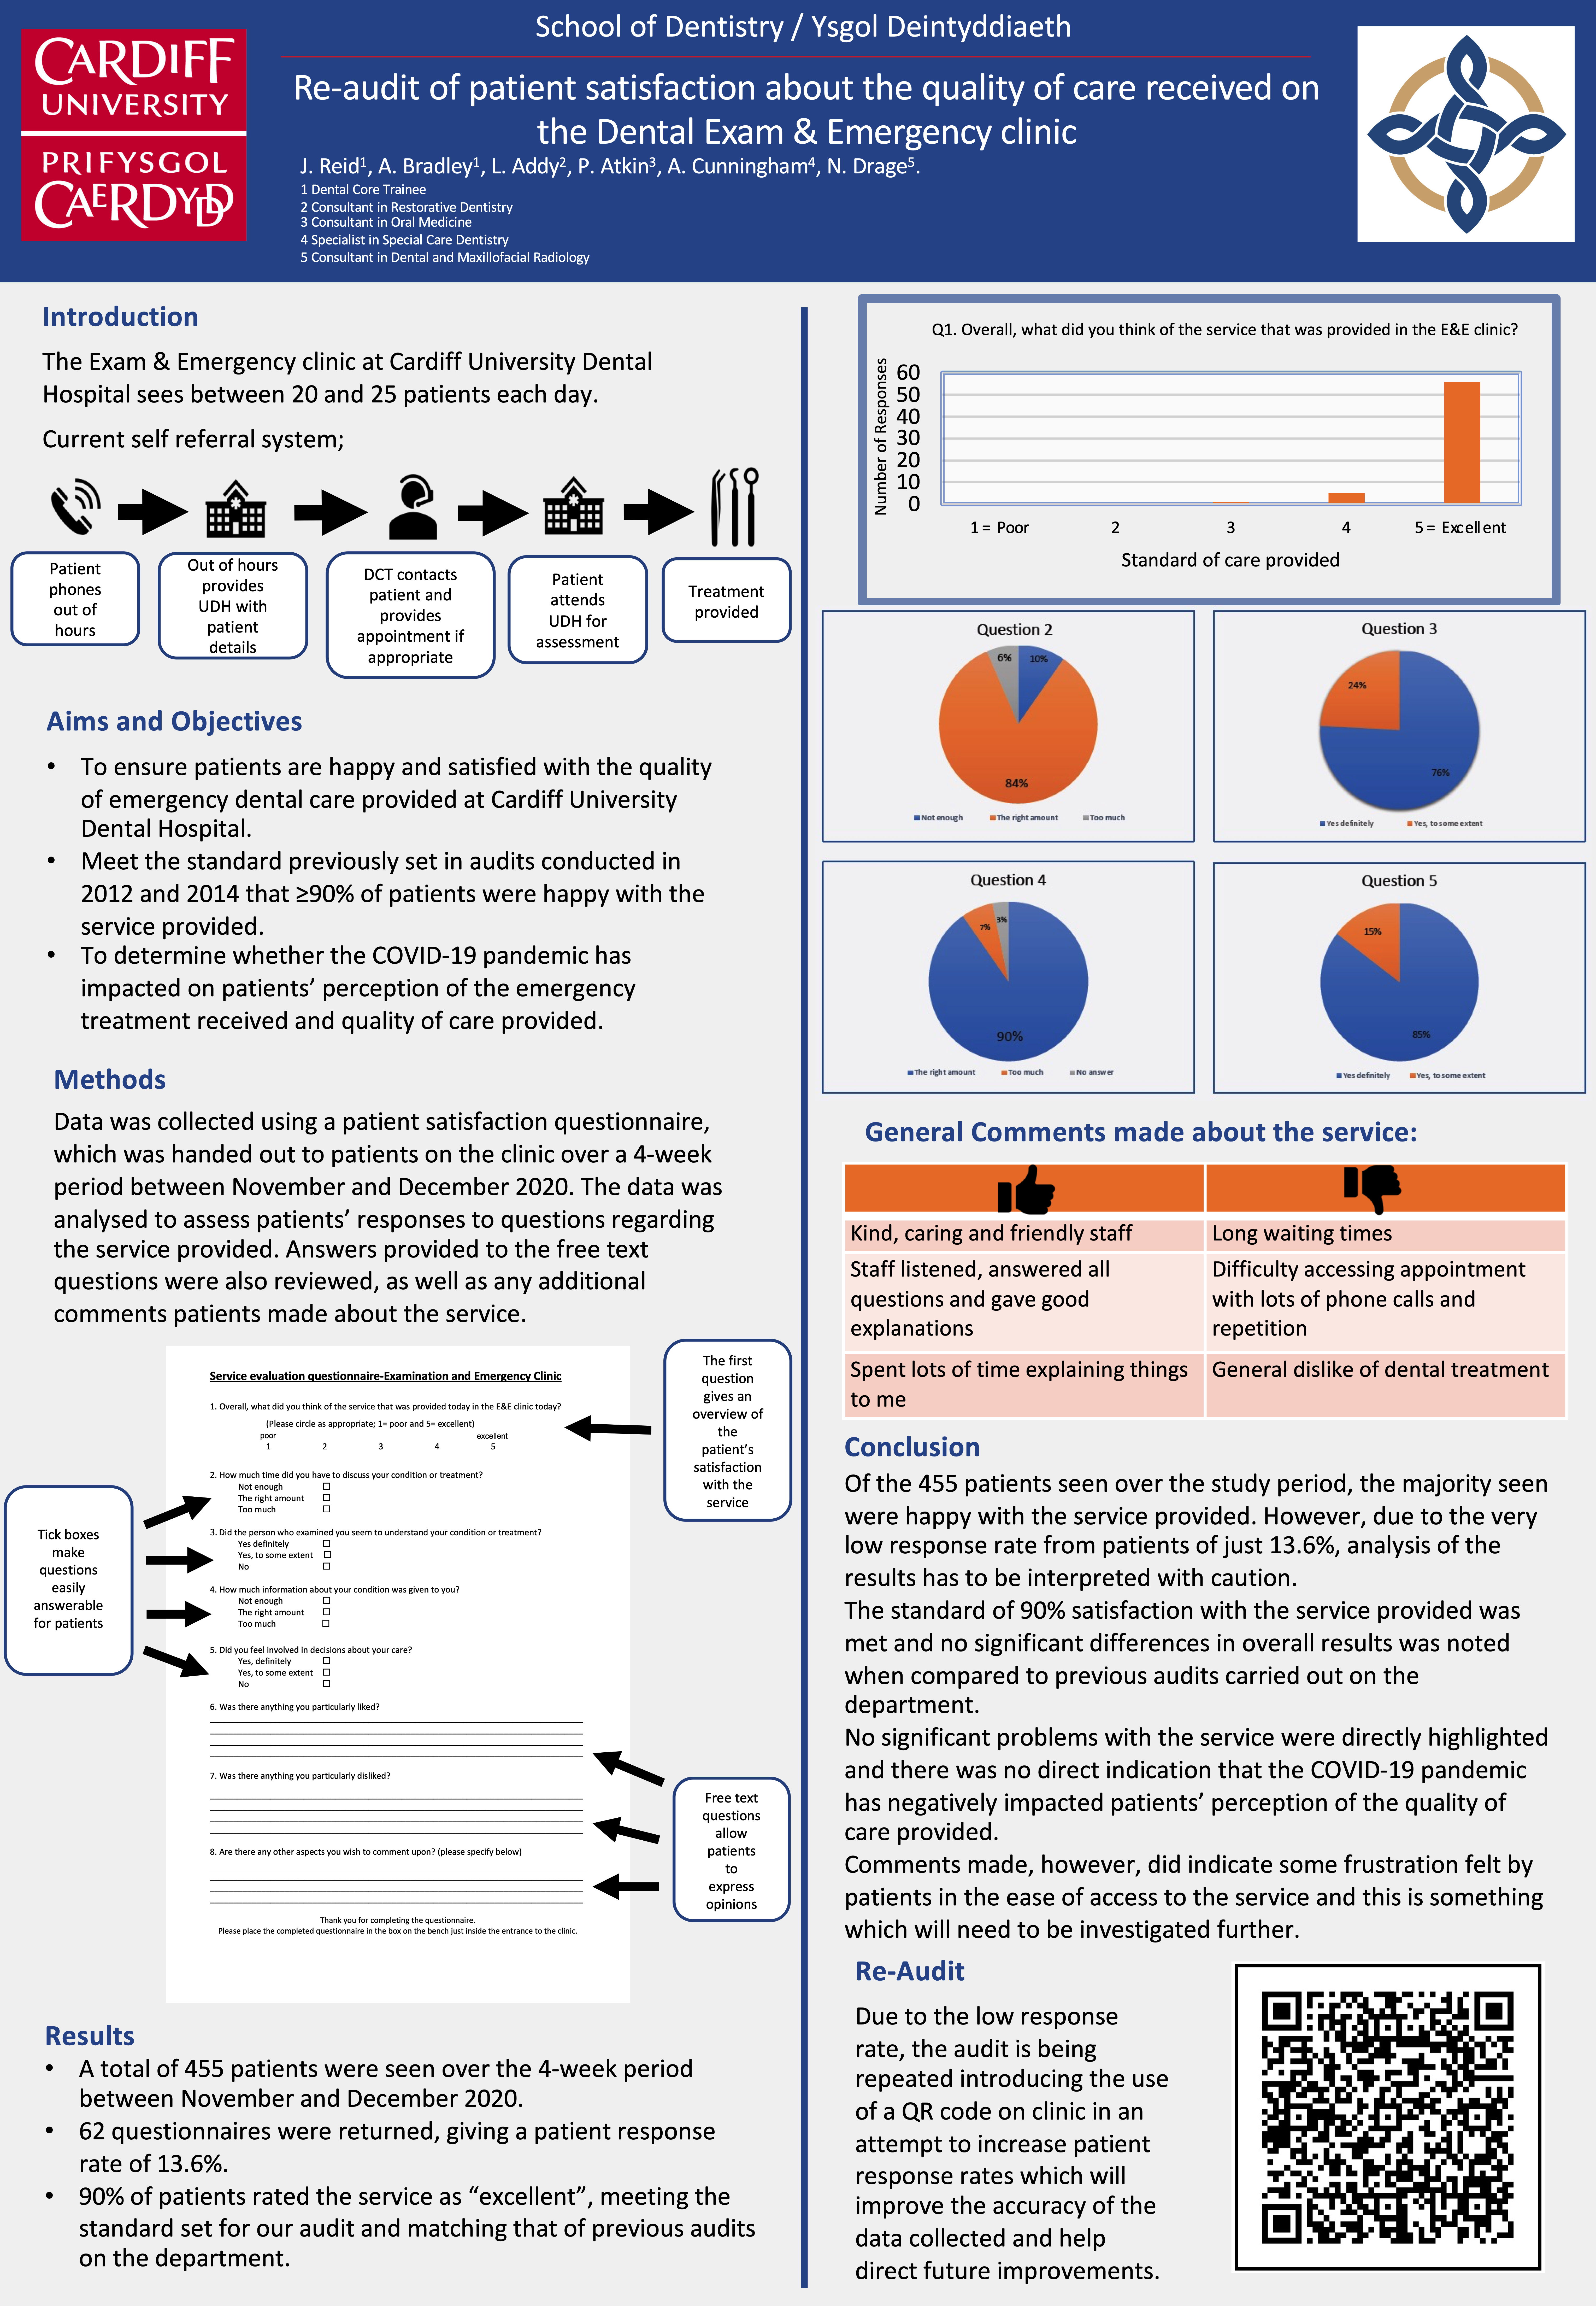 Poster Re-audit of patient satisfaction about quality of care received on the Dental Exam & Emergency clinic